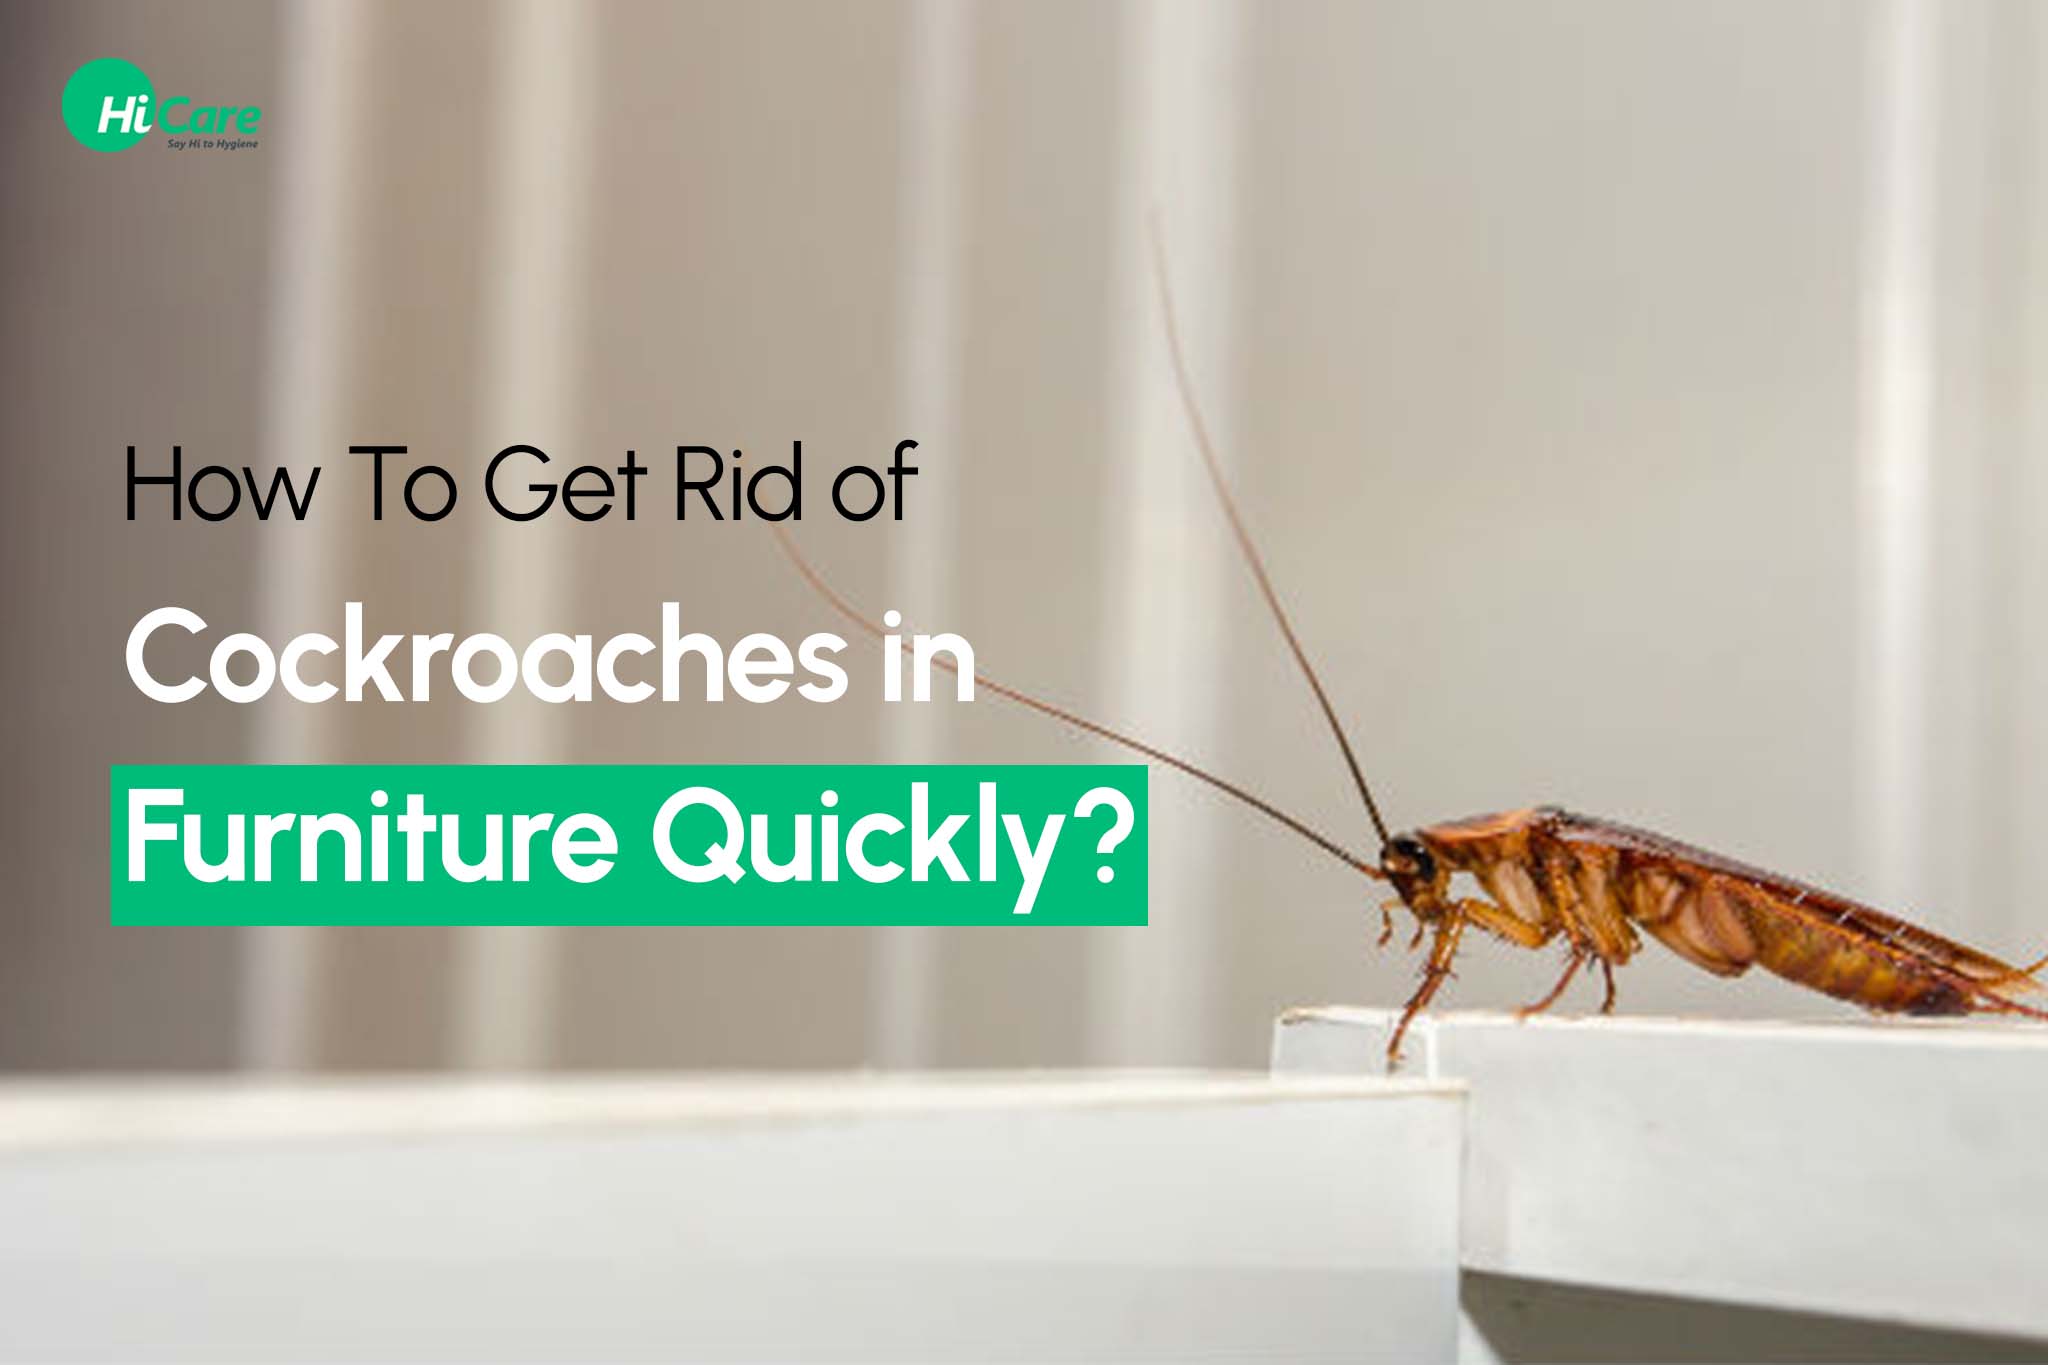 How to Get Rid of Cockroaches in Furniture Quickly